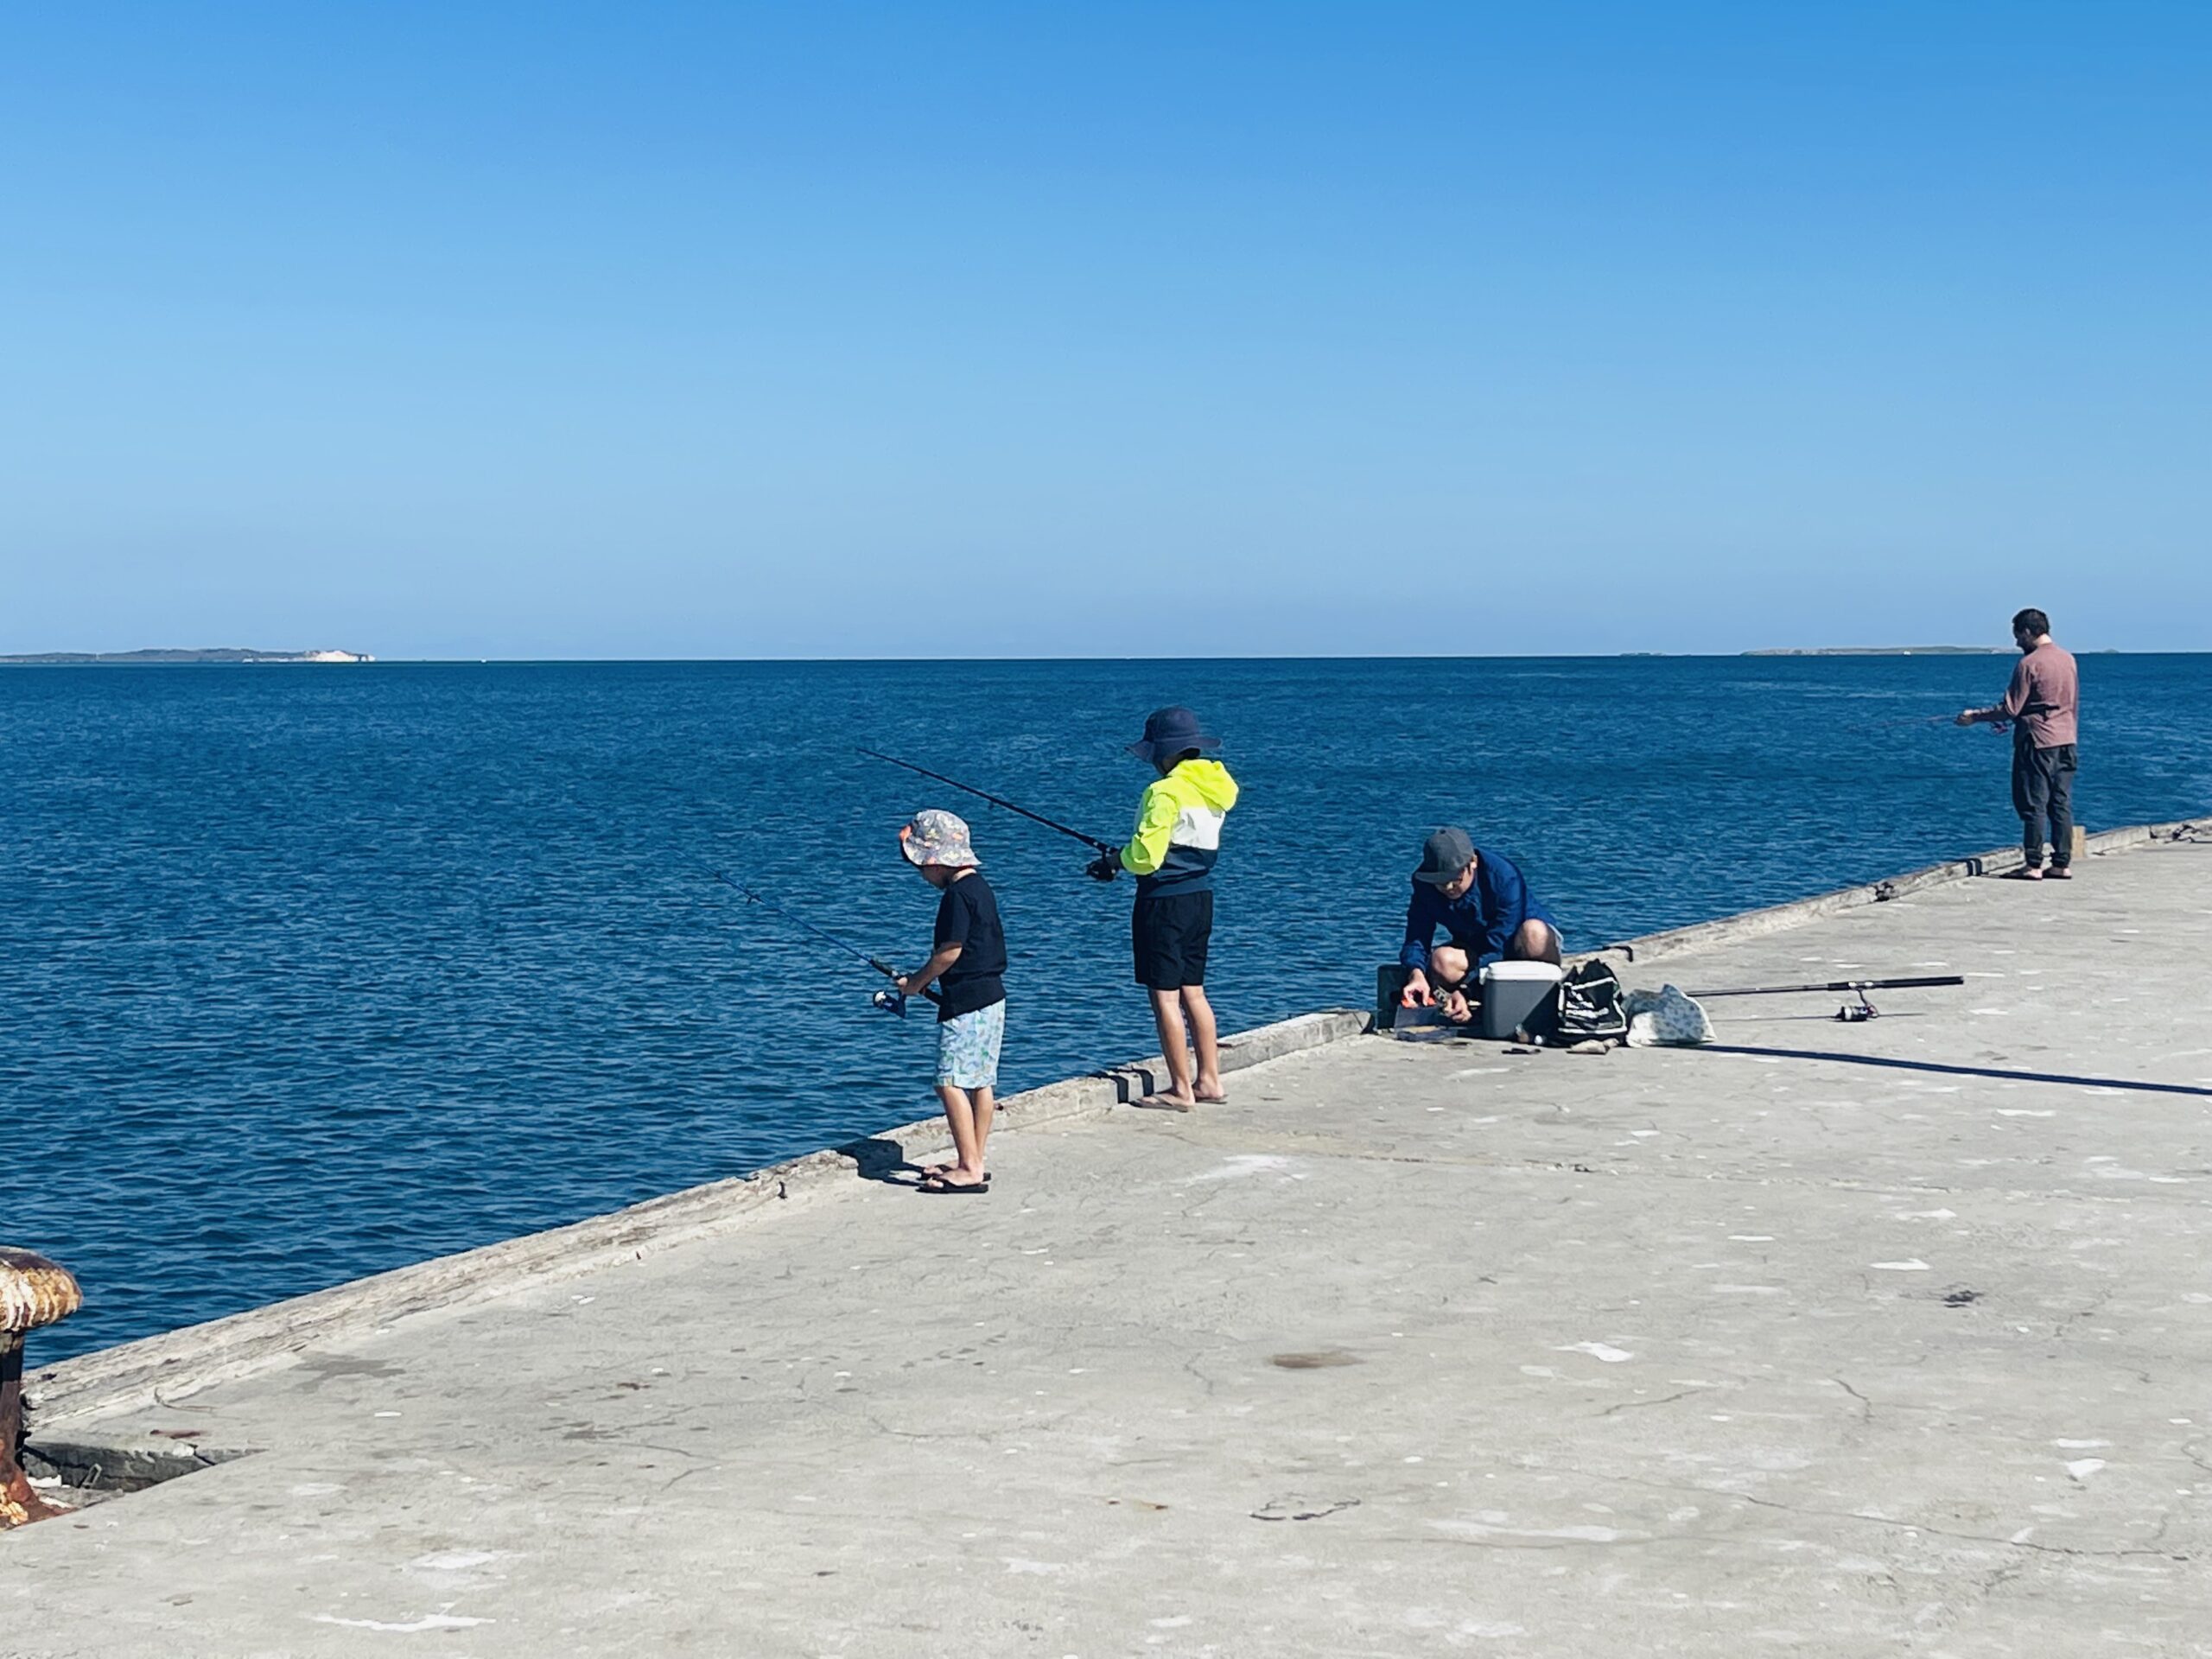 This photo was taken on the Ammo Jetty and shows two children and two adults fishing off the side of the jetty. The pathway is concrete and light silver in colour. The ocean is a deep blue, with the sky above a baby blue colour.